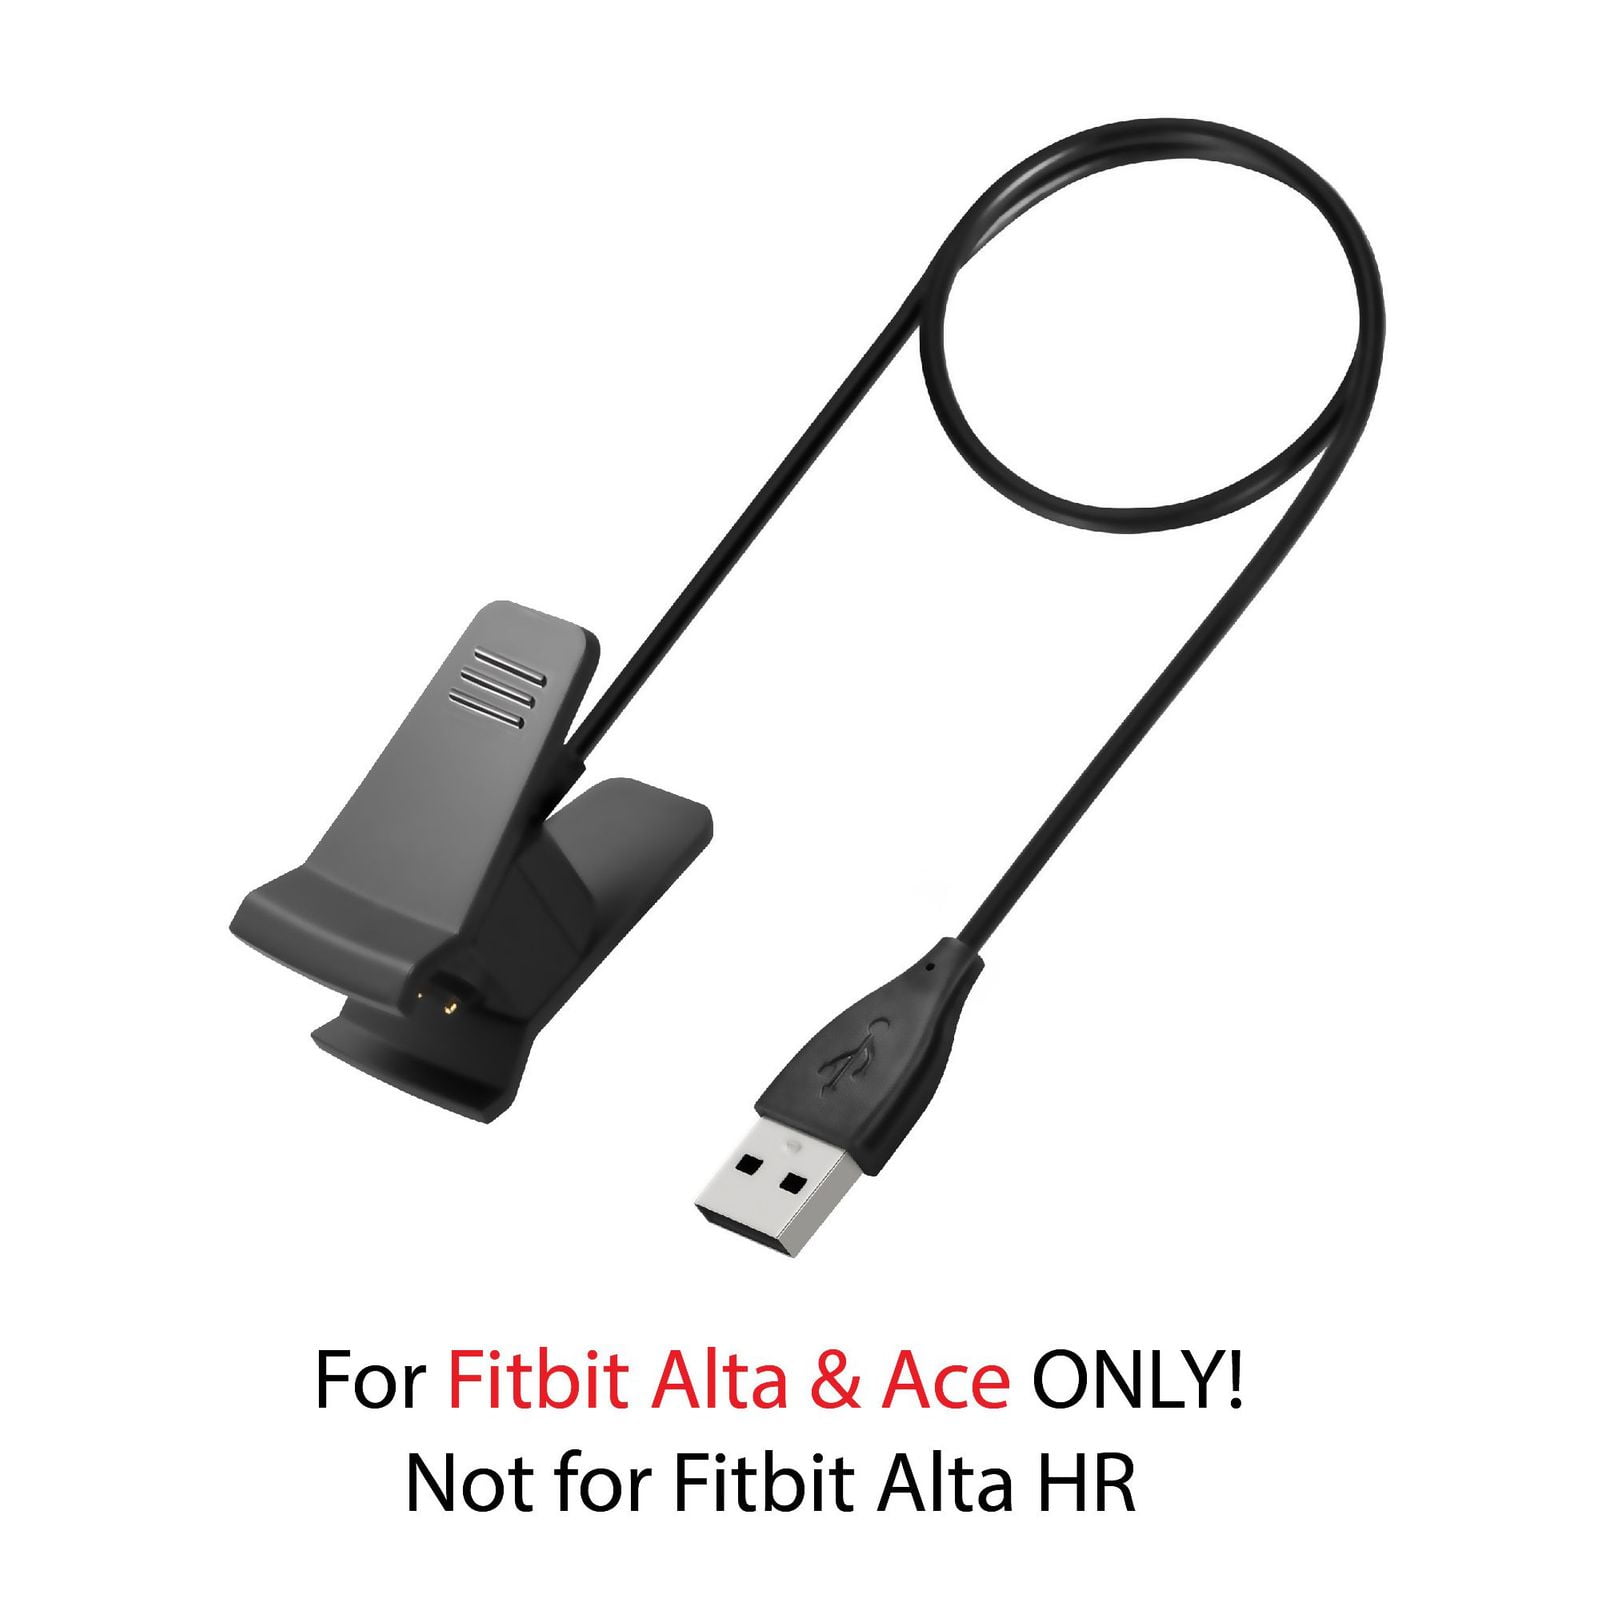 2 in 1 Black For Fitbit Alta HR Wristband & Phone Charging Dock Stand Compact 